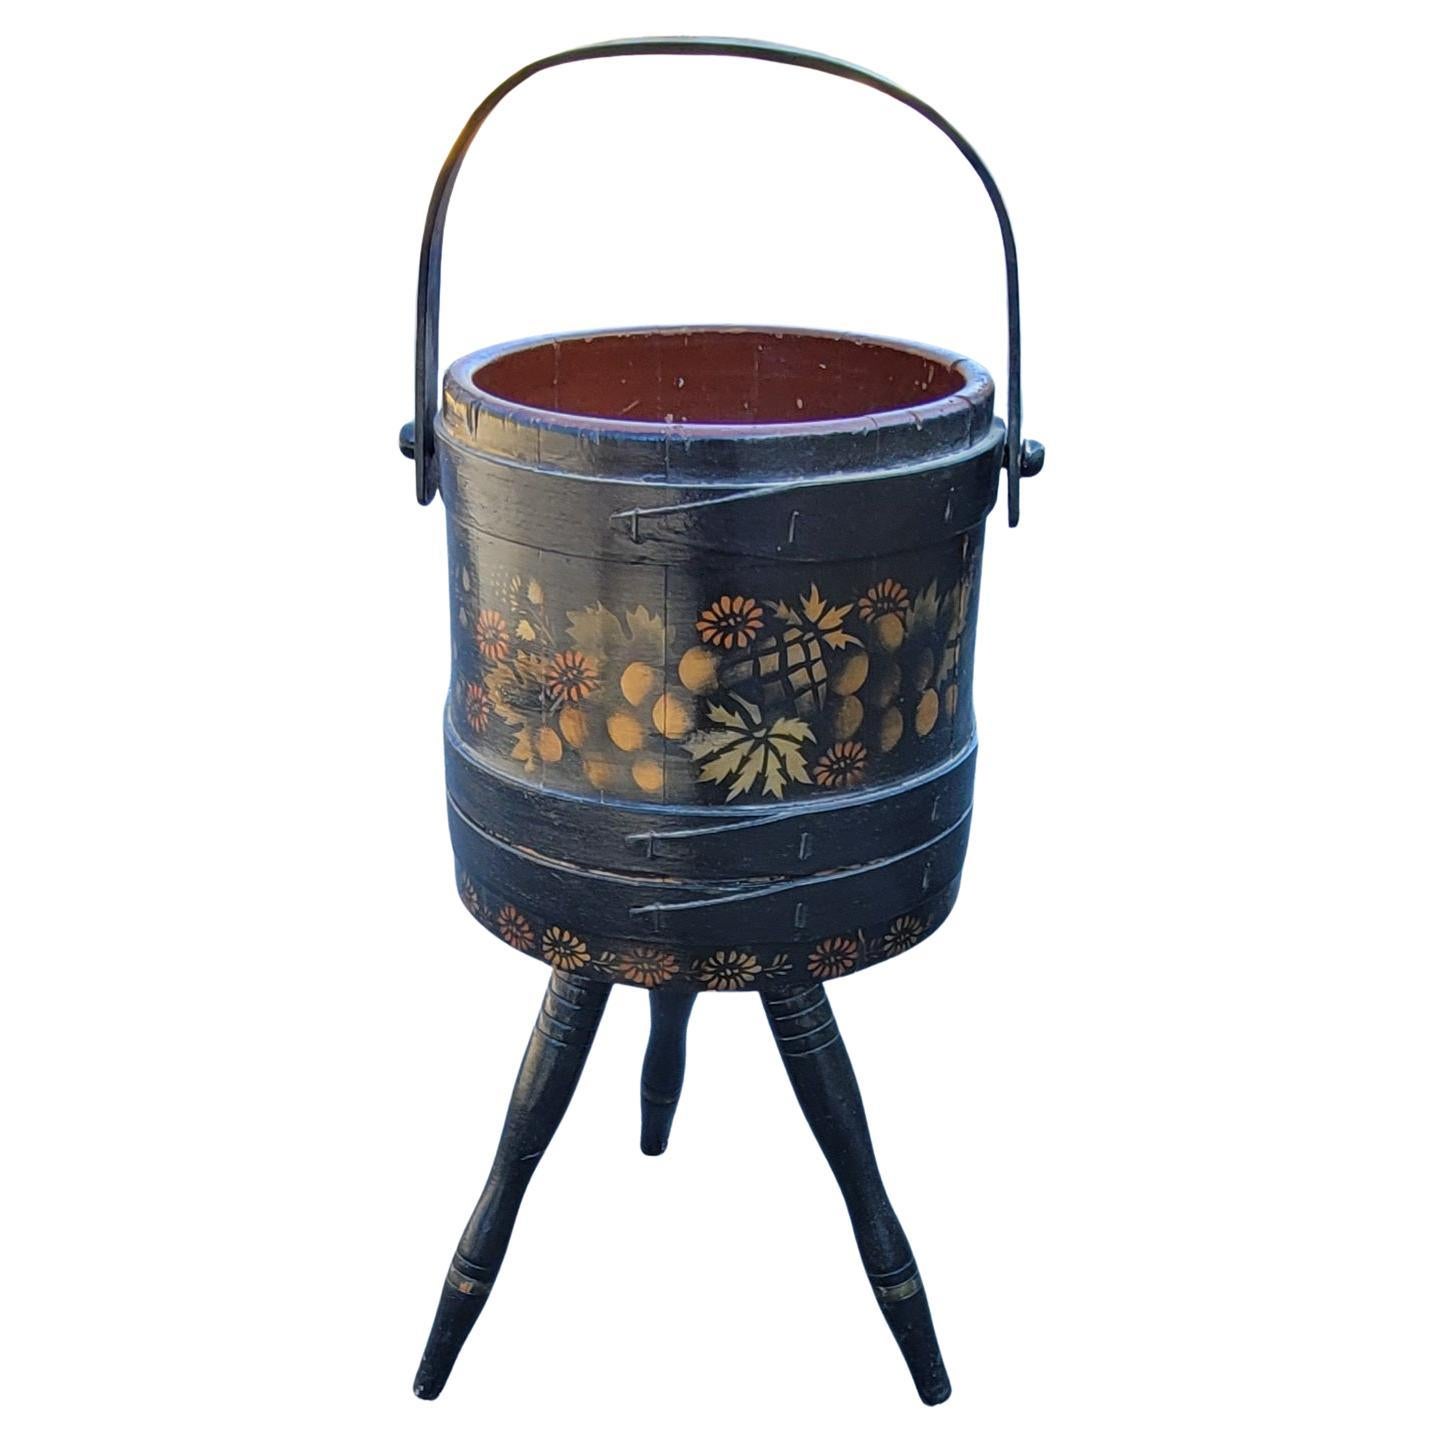 1920s Hand-Crafted, Painted and Decorated Tripod Firkin or Sewing Bucket For Sale